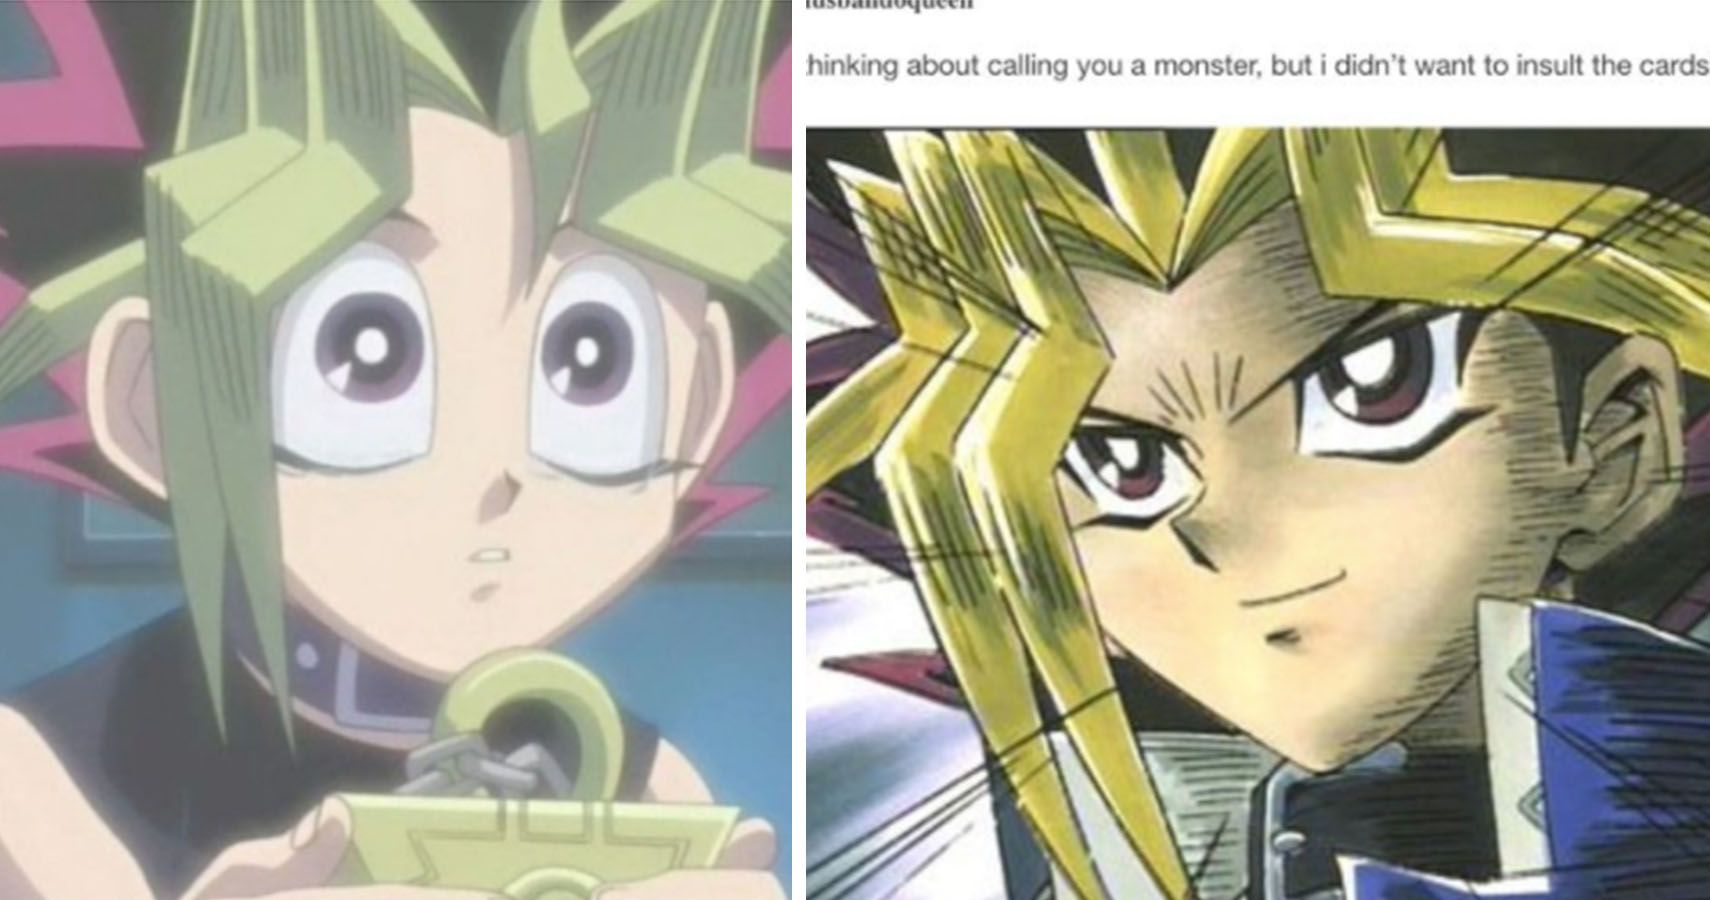 10 Absolutely Hilarious Anime Memes